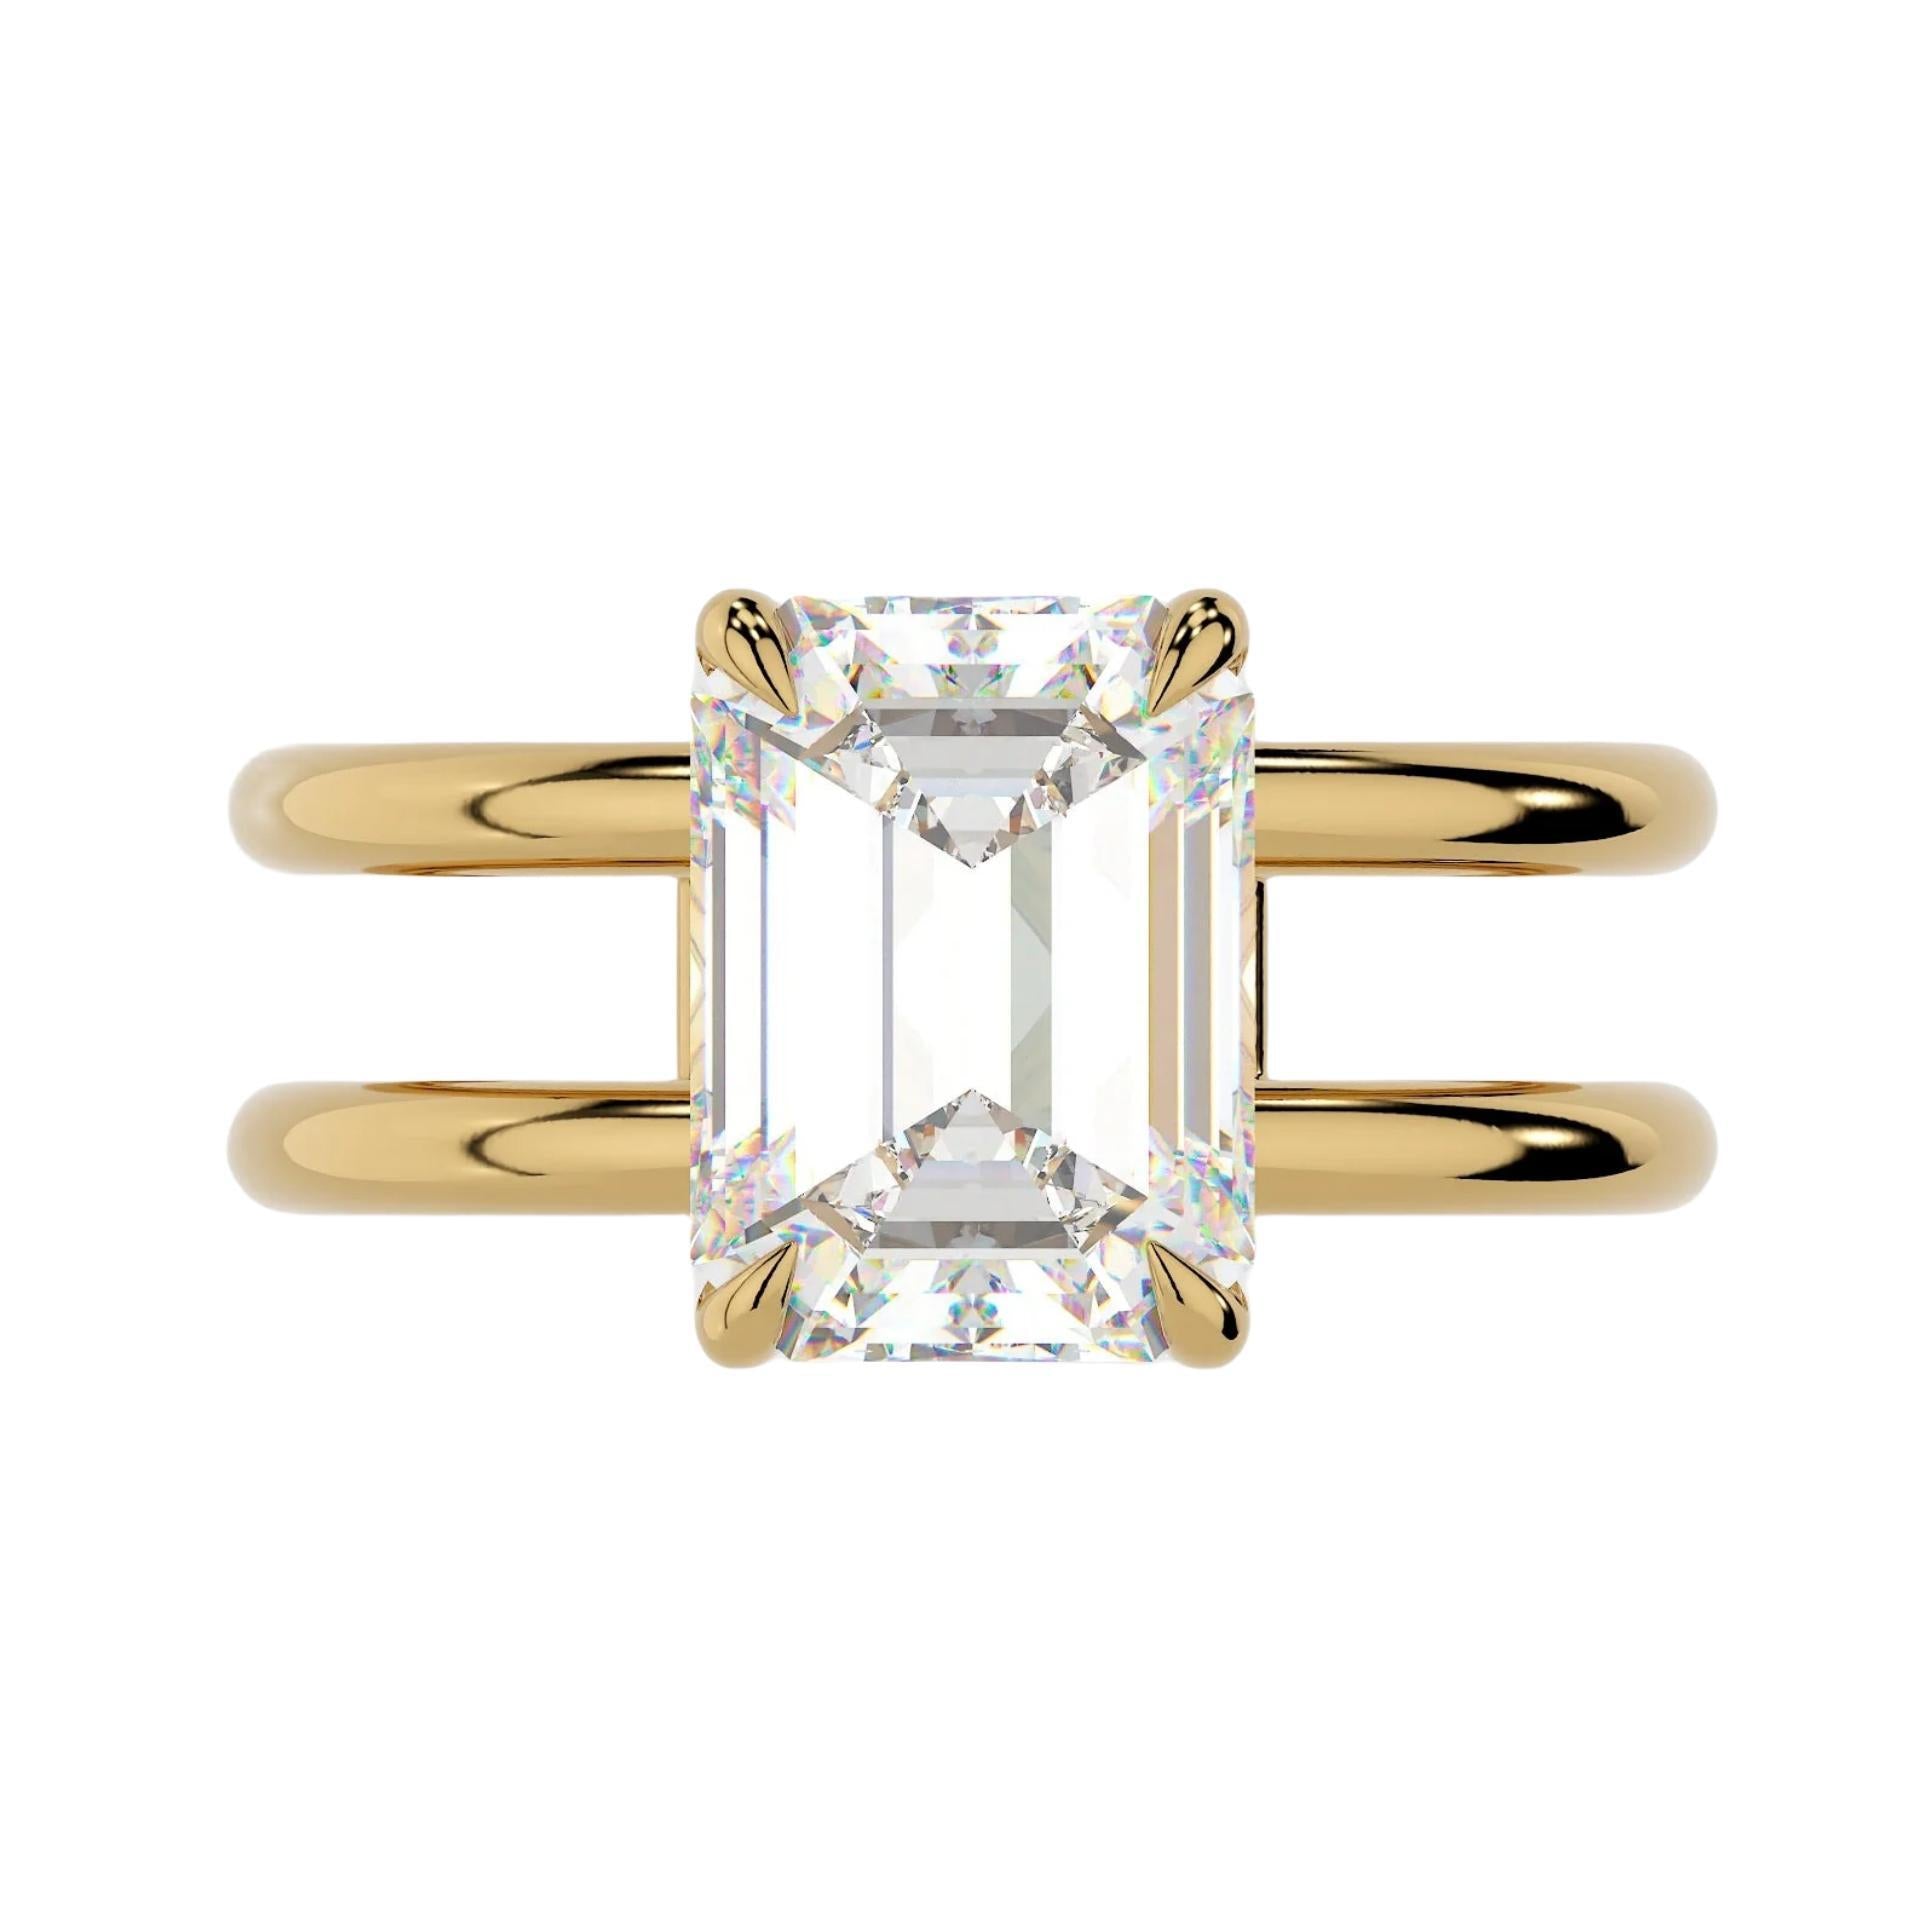 Emerald Cut Moissanite Engagement Ring With Double Solitaire Bands